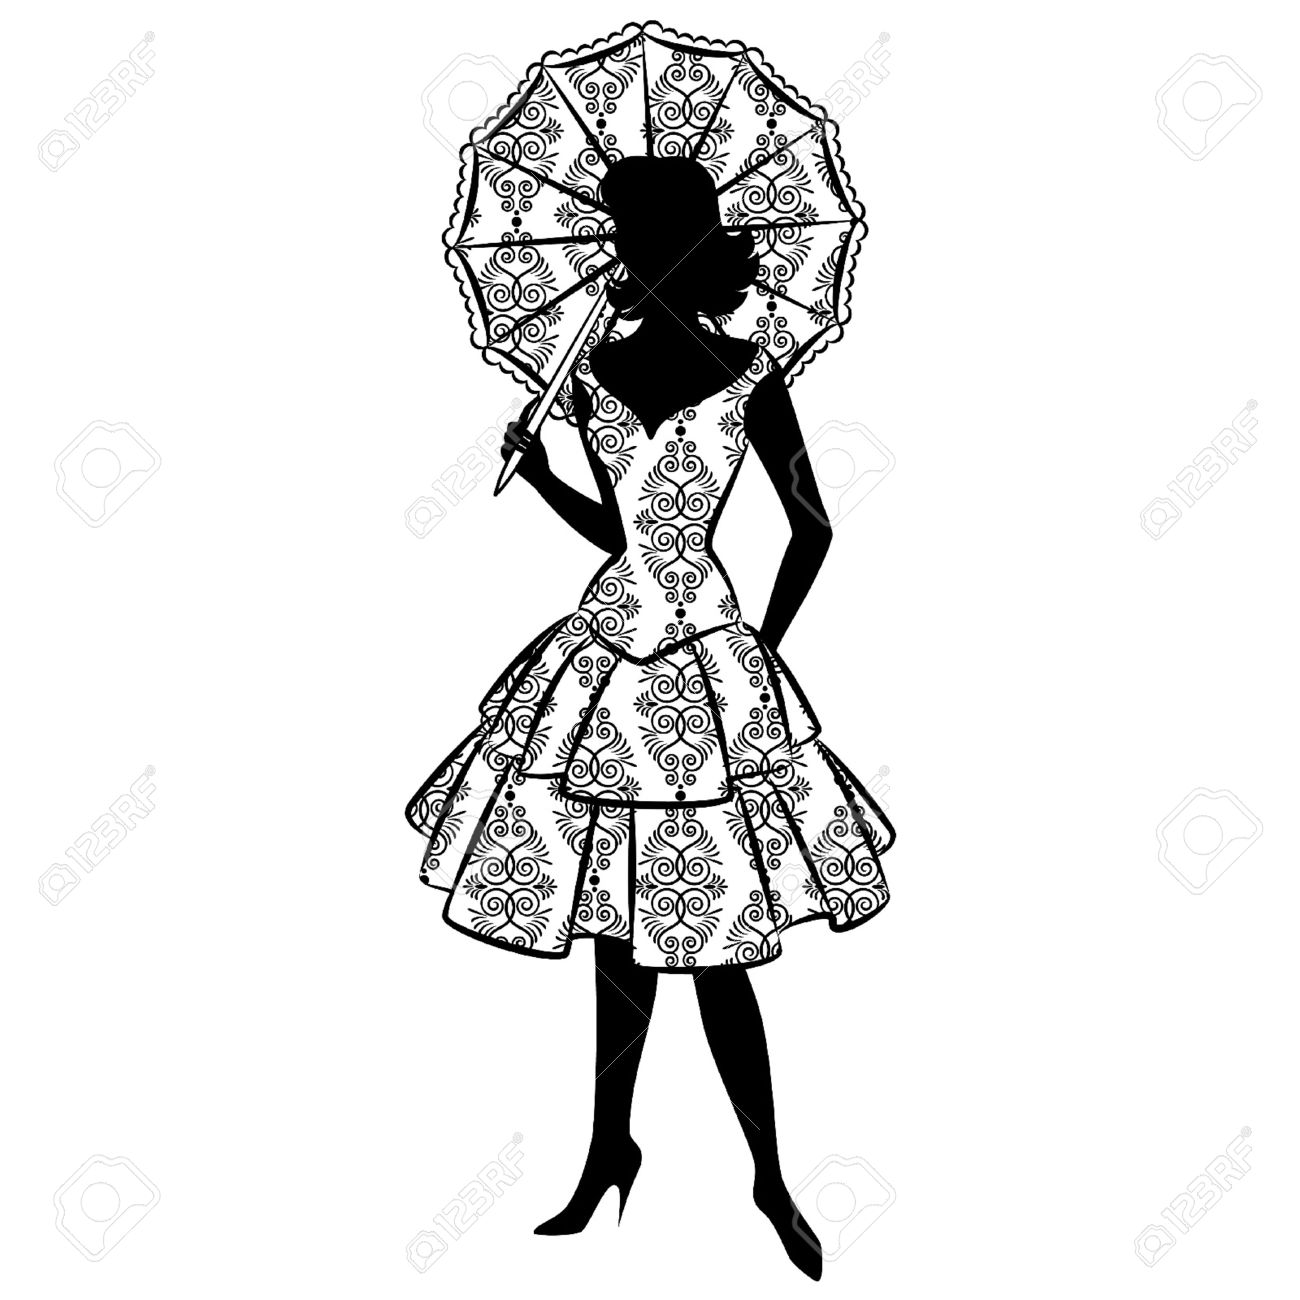 Vintage Silhouette Of Girl With Umbrella Royalty Free Cliparts.